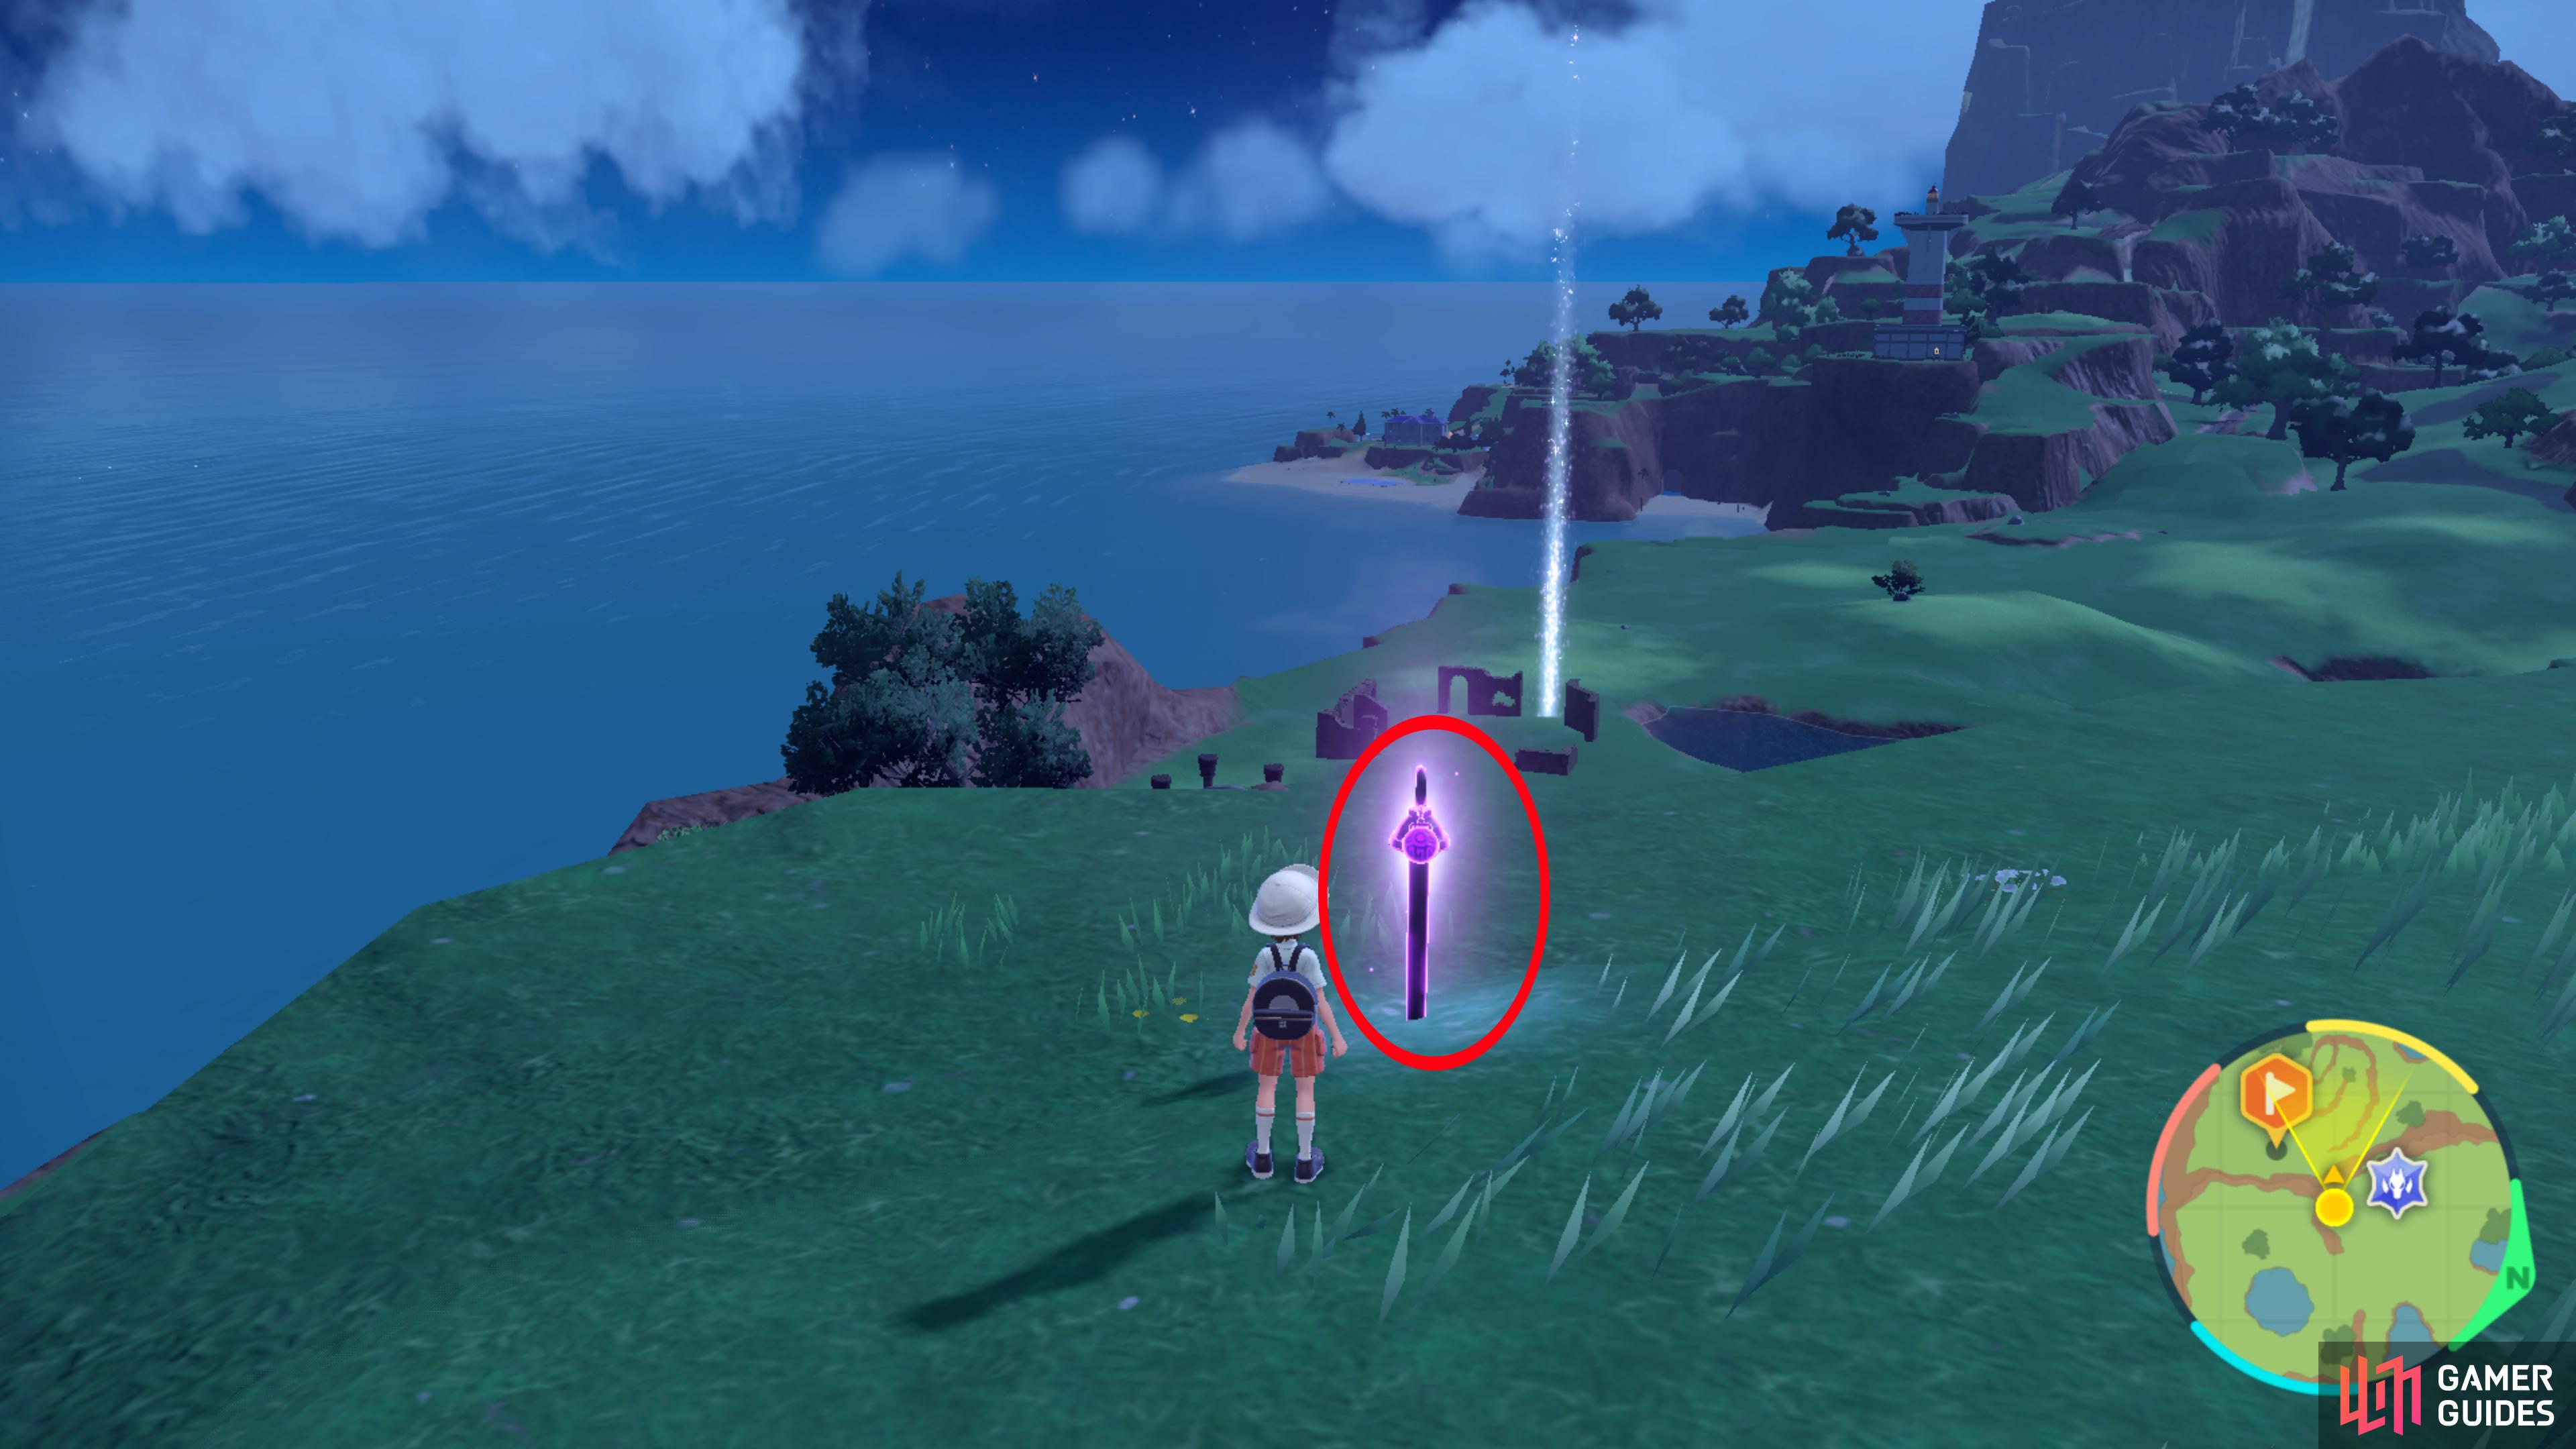 the purple stake sits on the edge, overlooking some ruins.